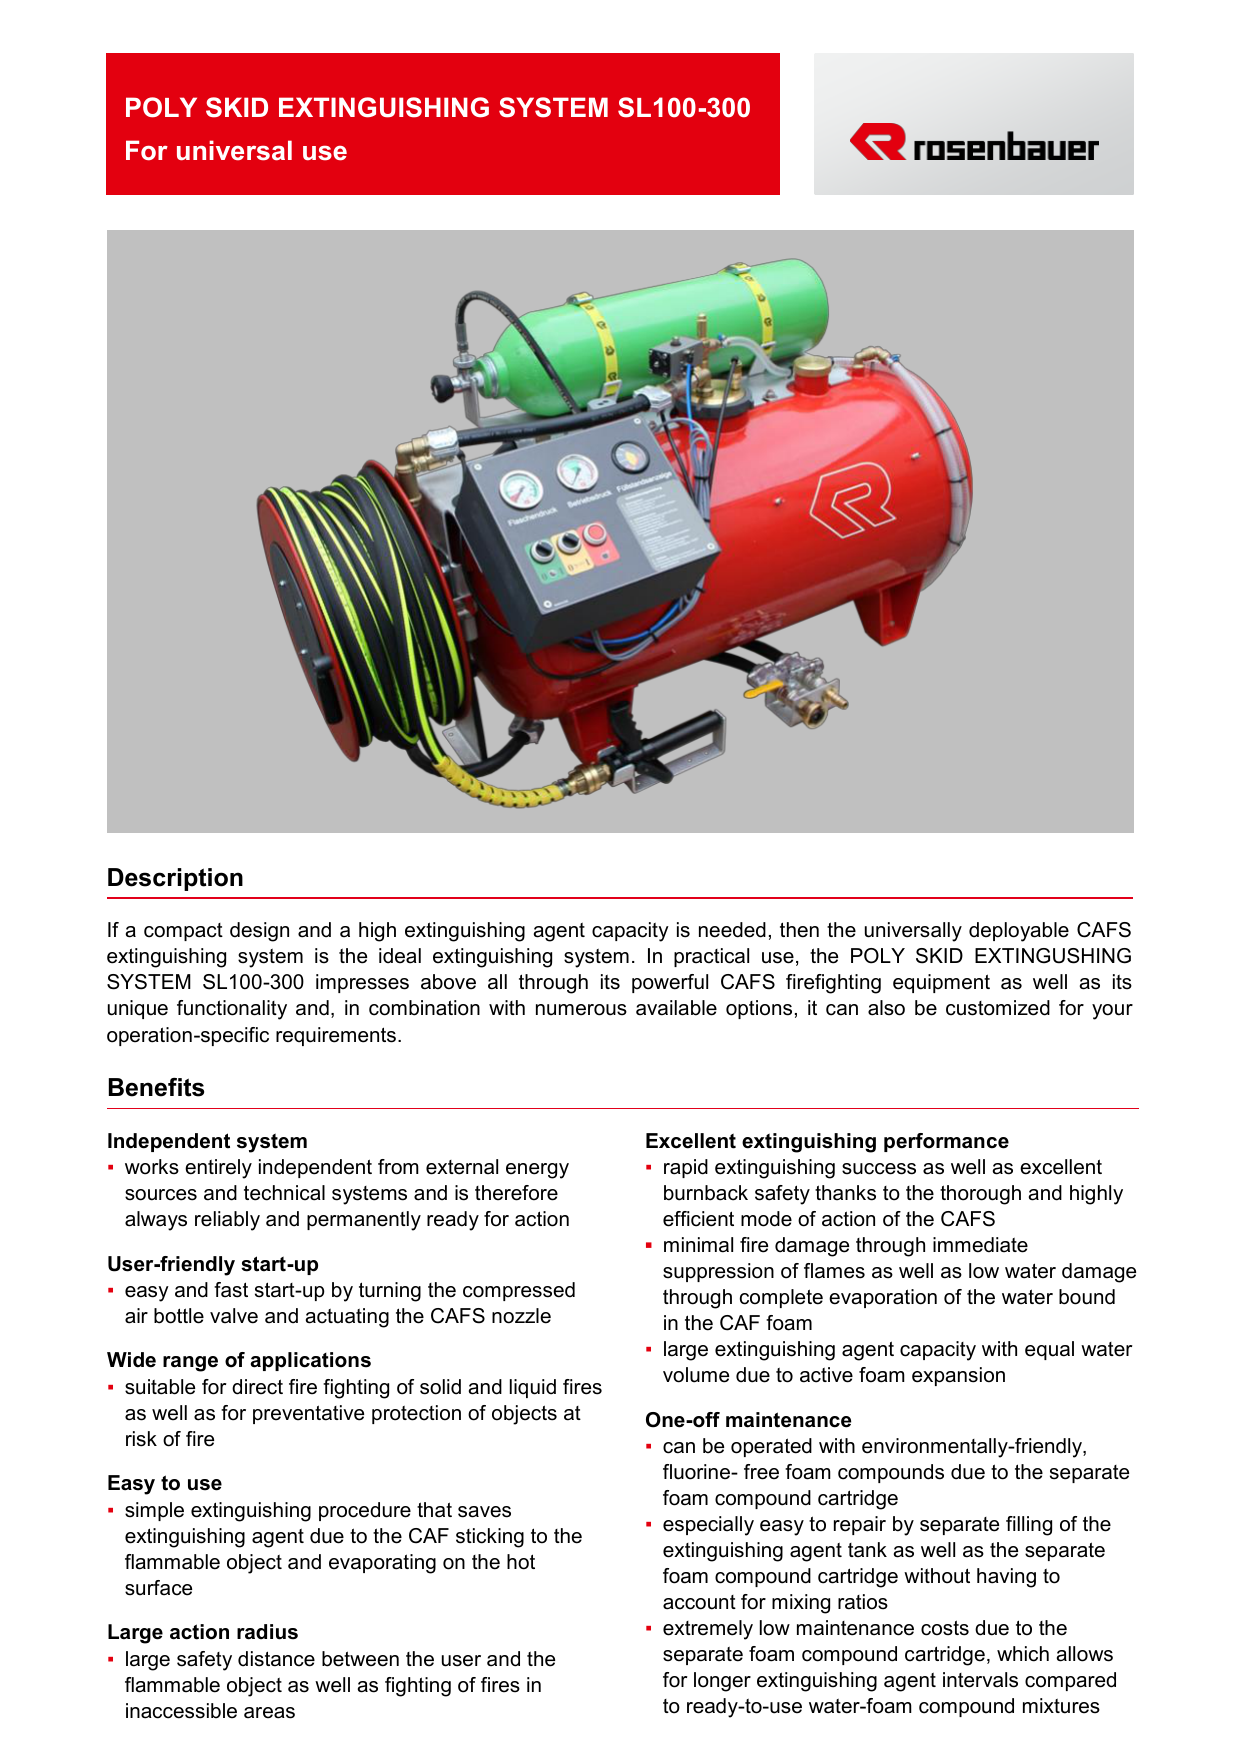 Compressed Air Foam System Rapid Response Burner Fire Control Industrial Fire Protection Offshore Construction Fabrication